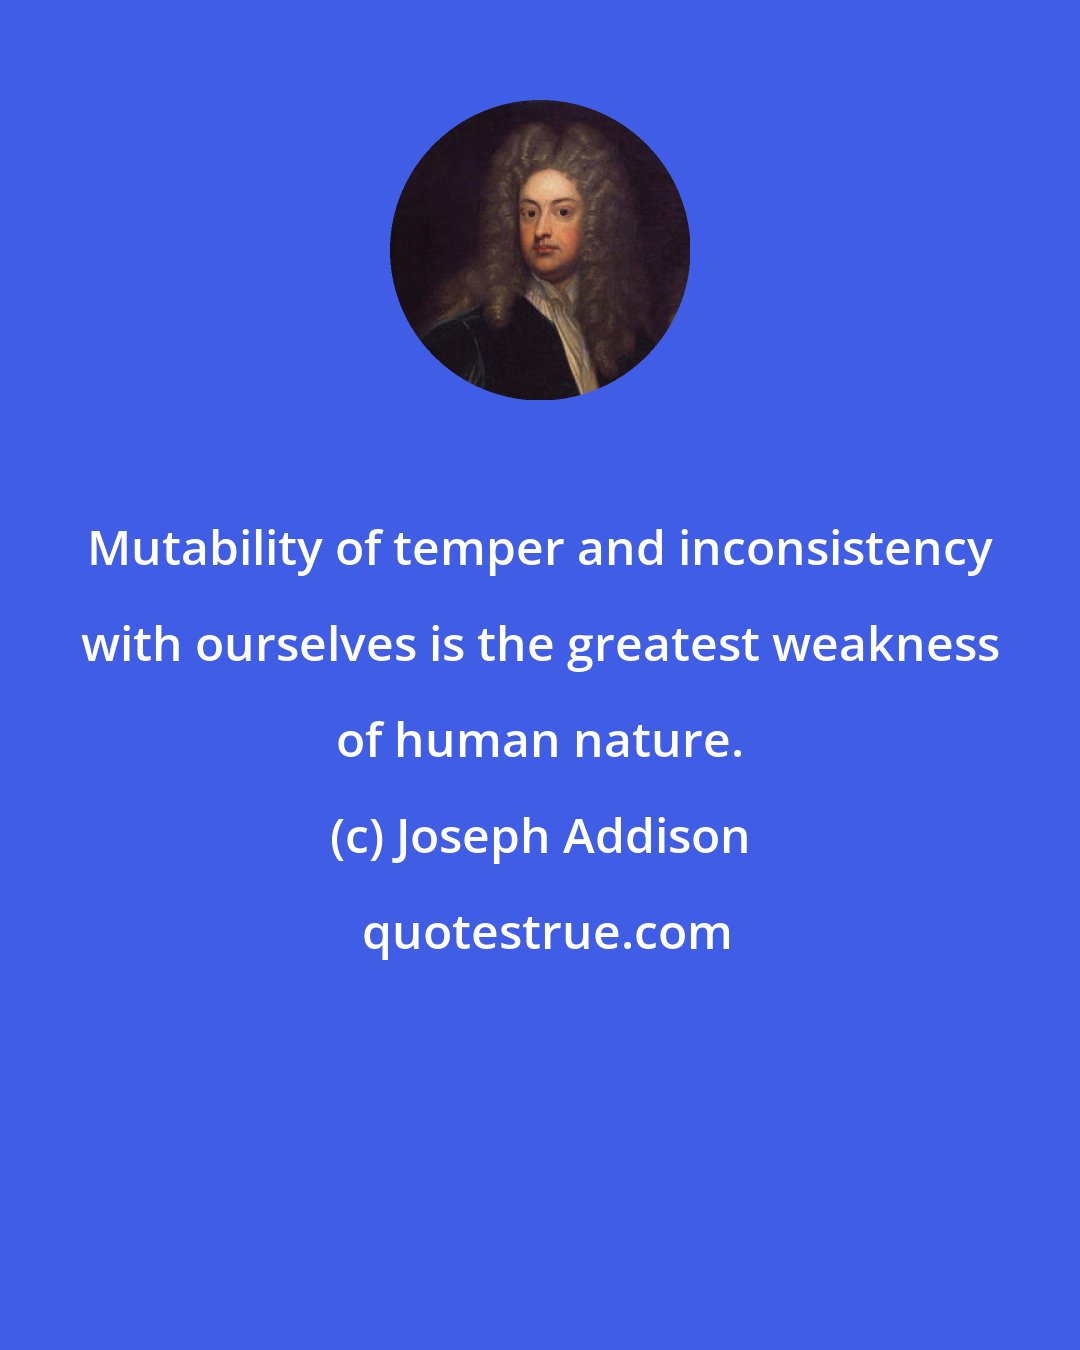 Joseph Addison: Mutability of temper and inconsistency with ourselves is the greatest weakness of human nature.